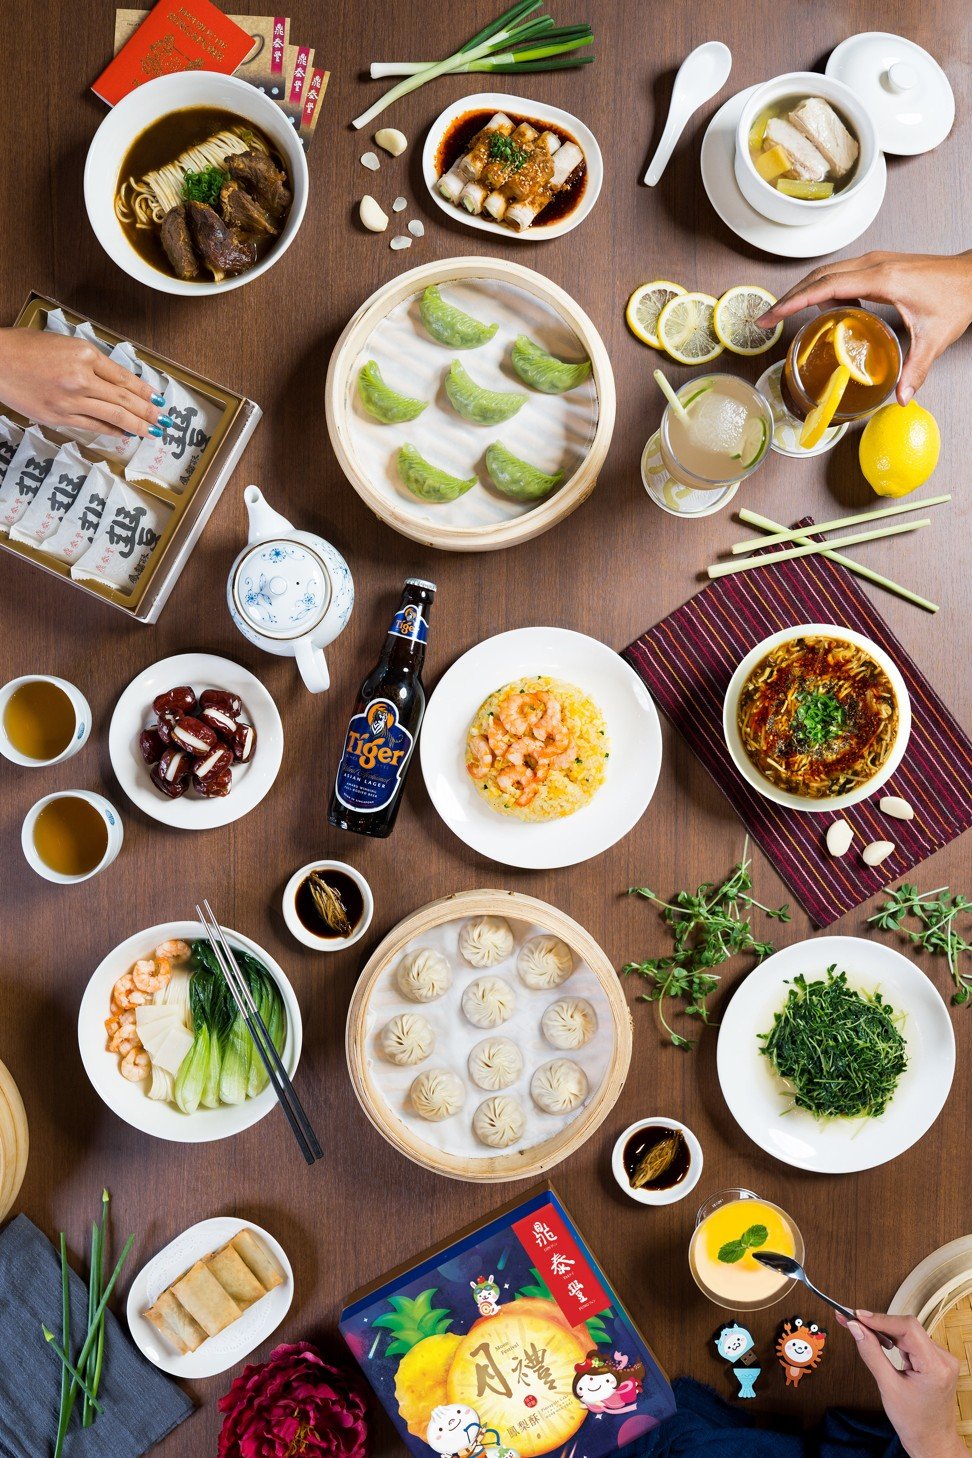 A selection of dishes and drinks at Din Tai Fung.